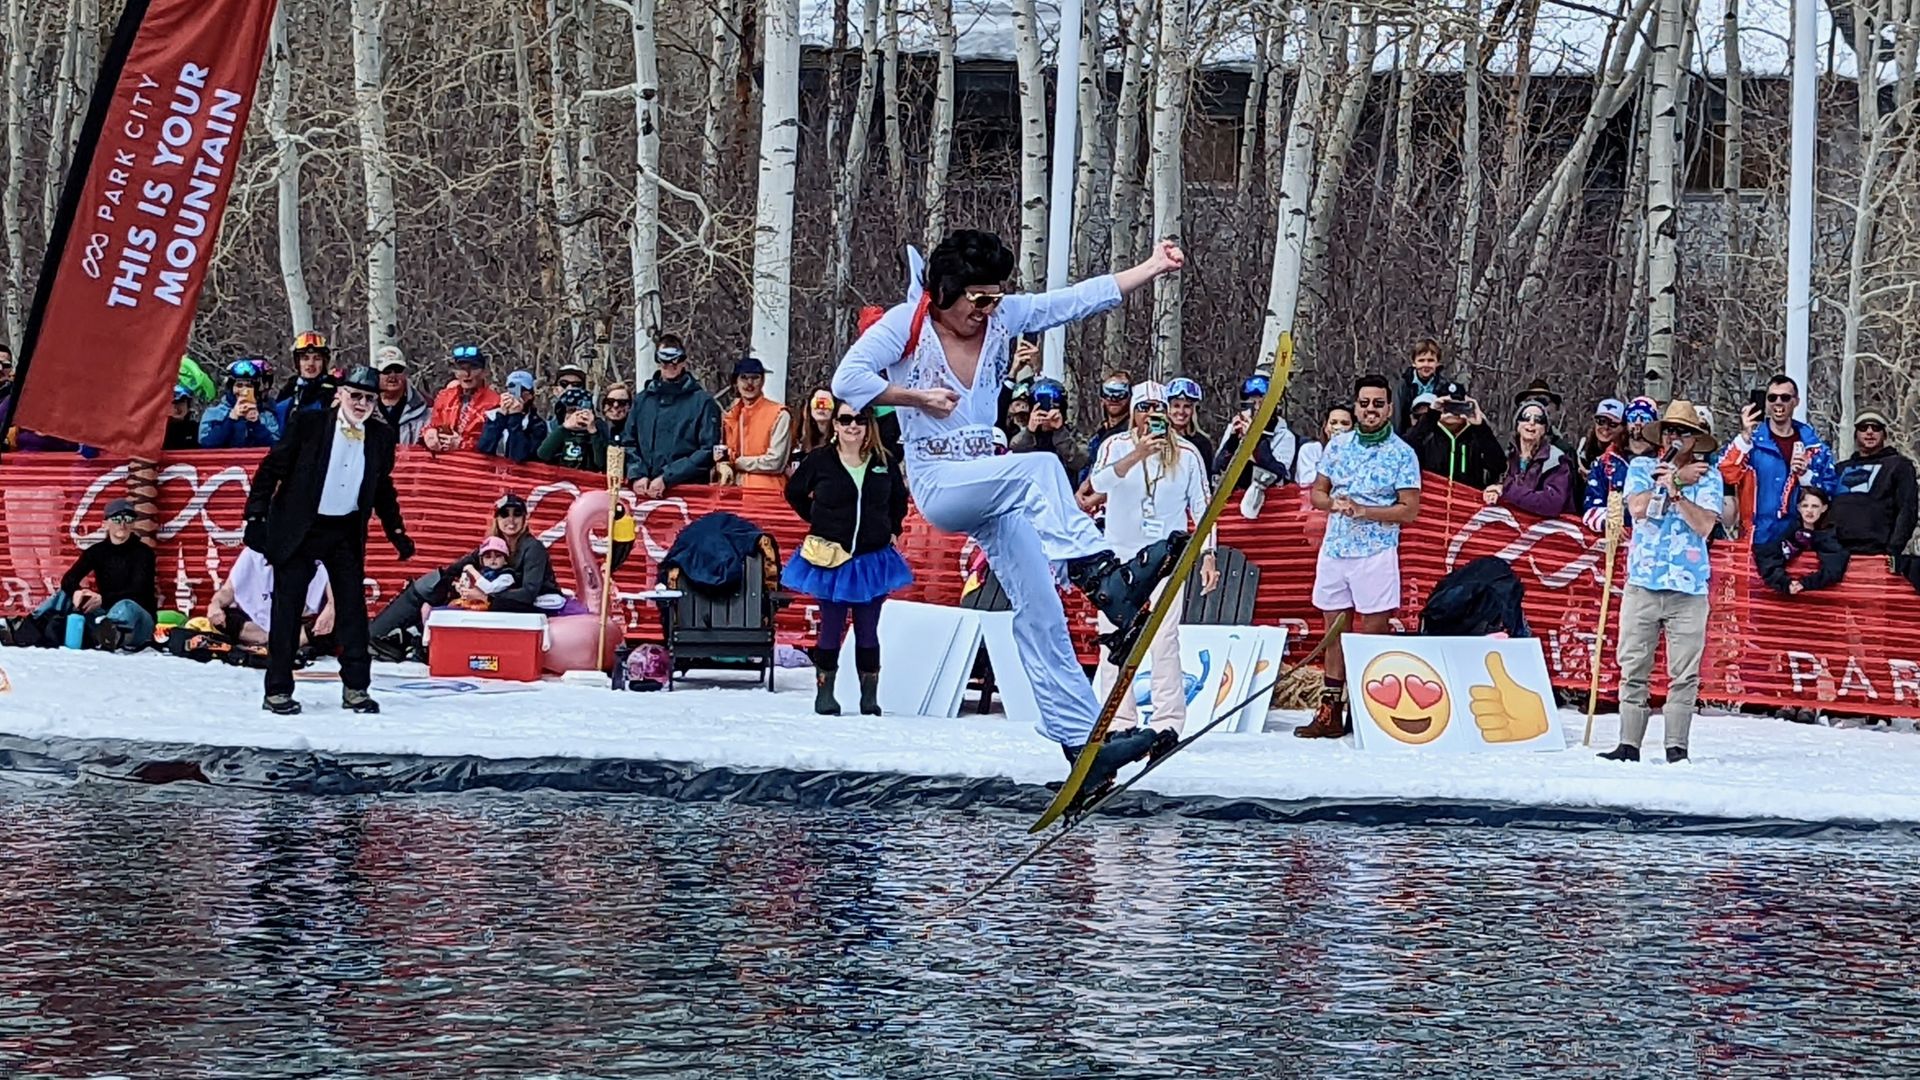 A man dressed as Elvis Presley plays air guitar during a ski jump over water.